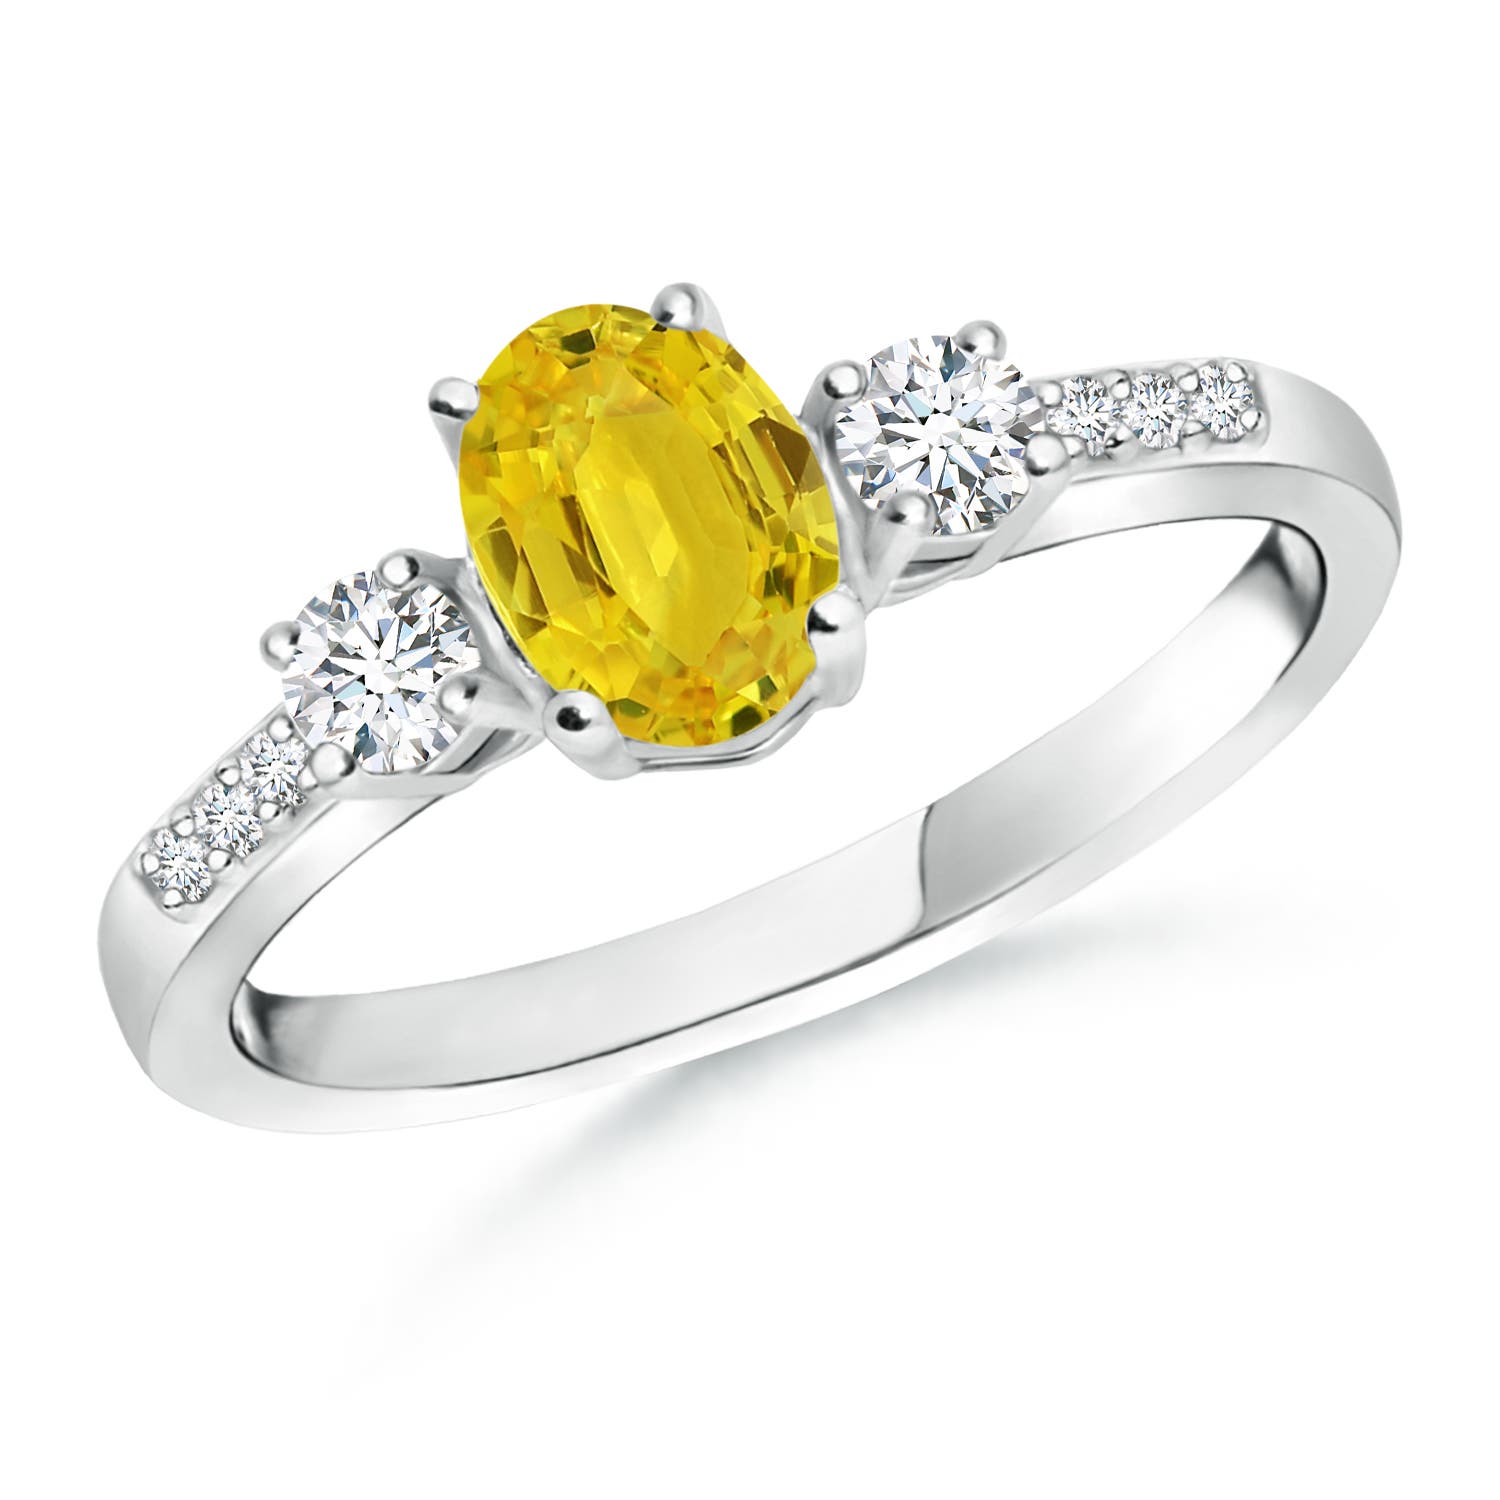 Golden Yellow Sapphire Ring in White Gold Over Sterling Silver | Alexander D